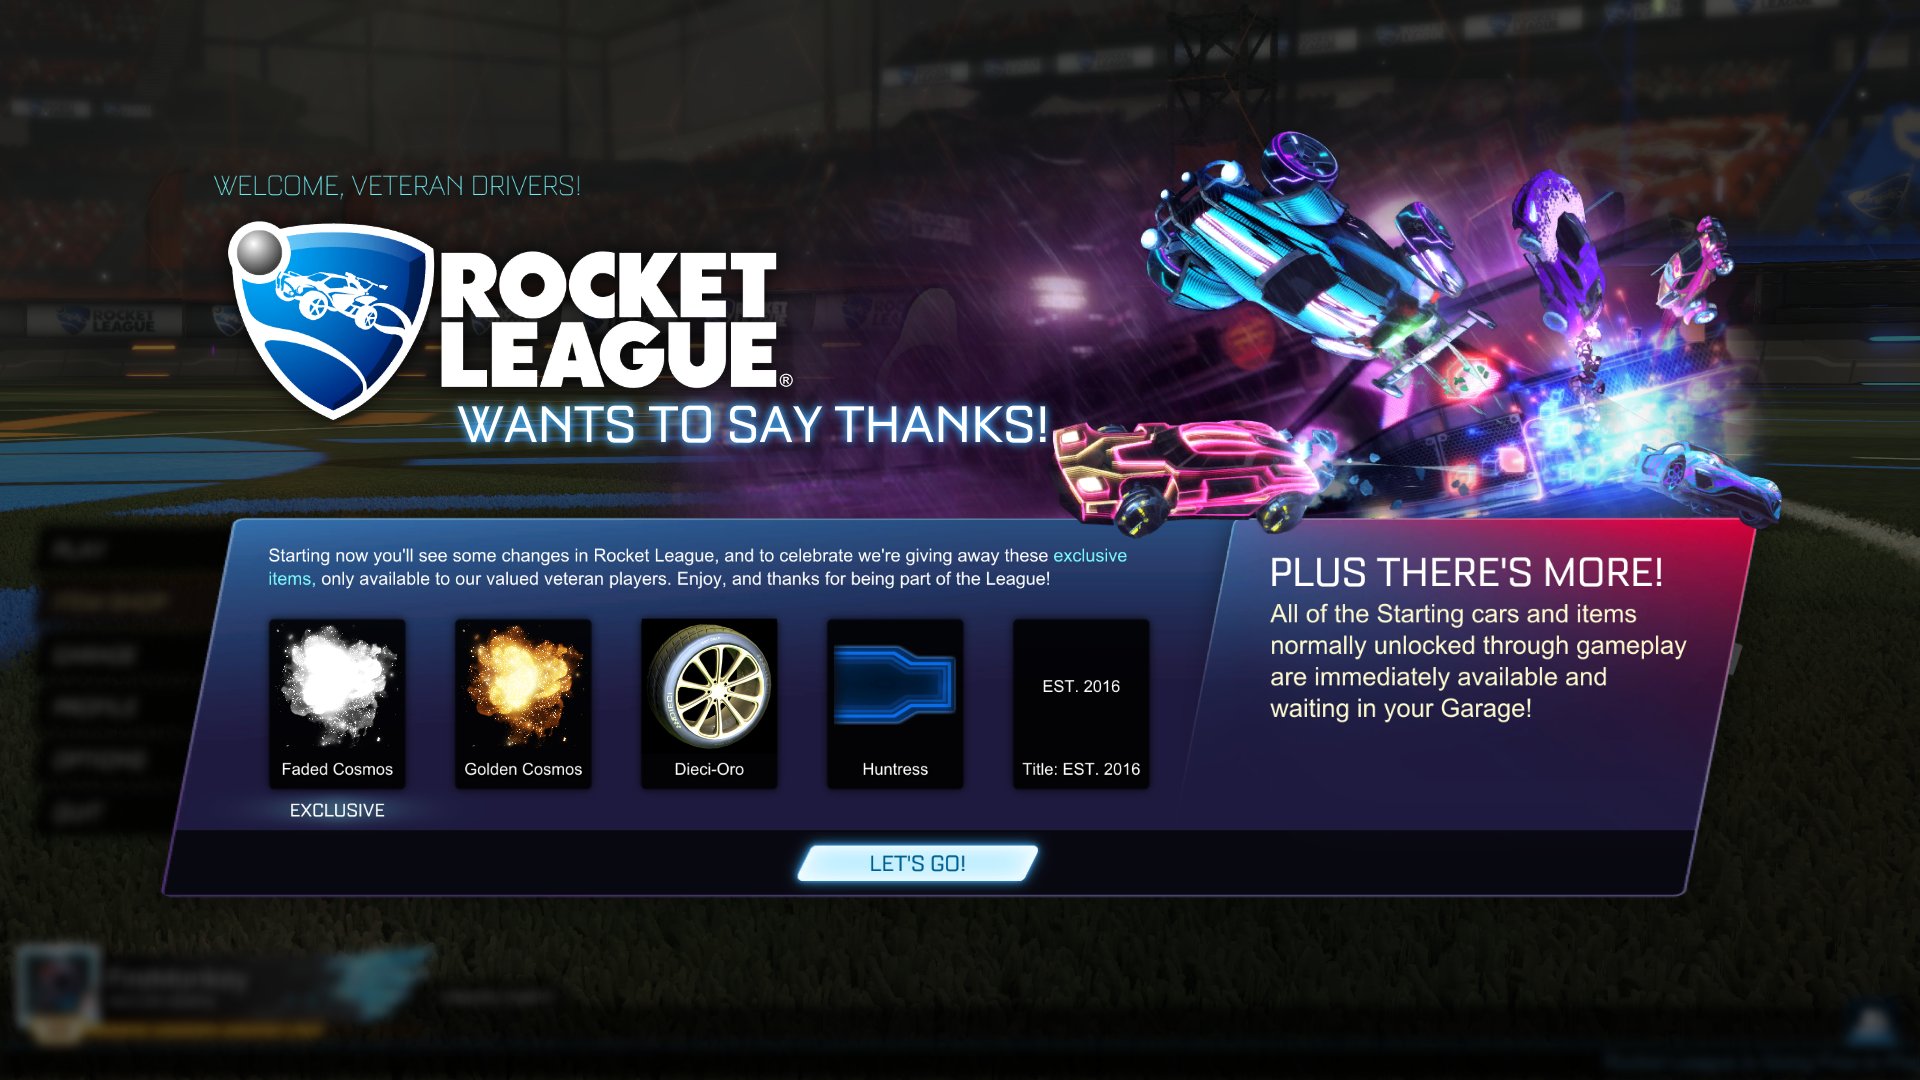 Ifiremonkey Rocket League Thread This Thread Will Go Over The Changes Pushed To The Steam Switch Xbox And Ps4 Version Of The Game Today The Game Is Still Not Out